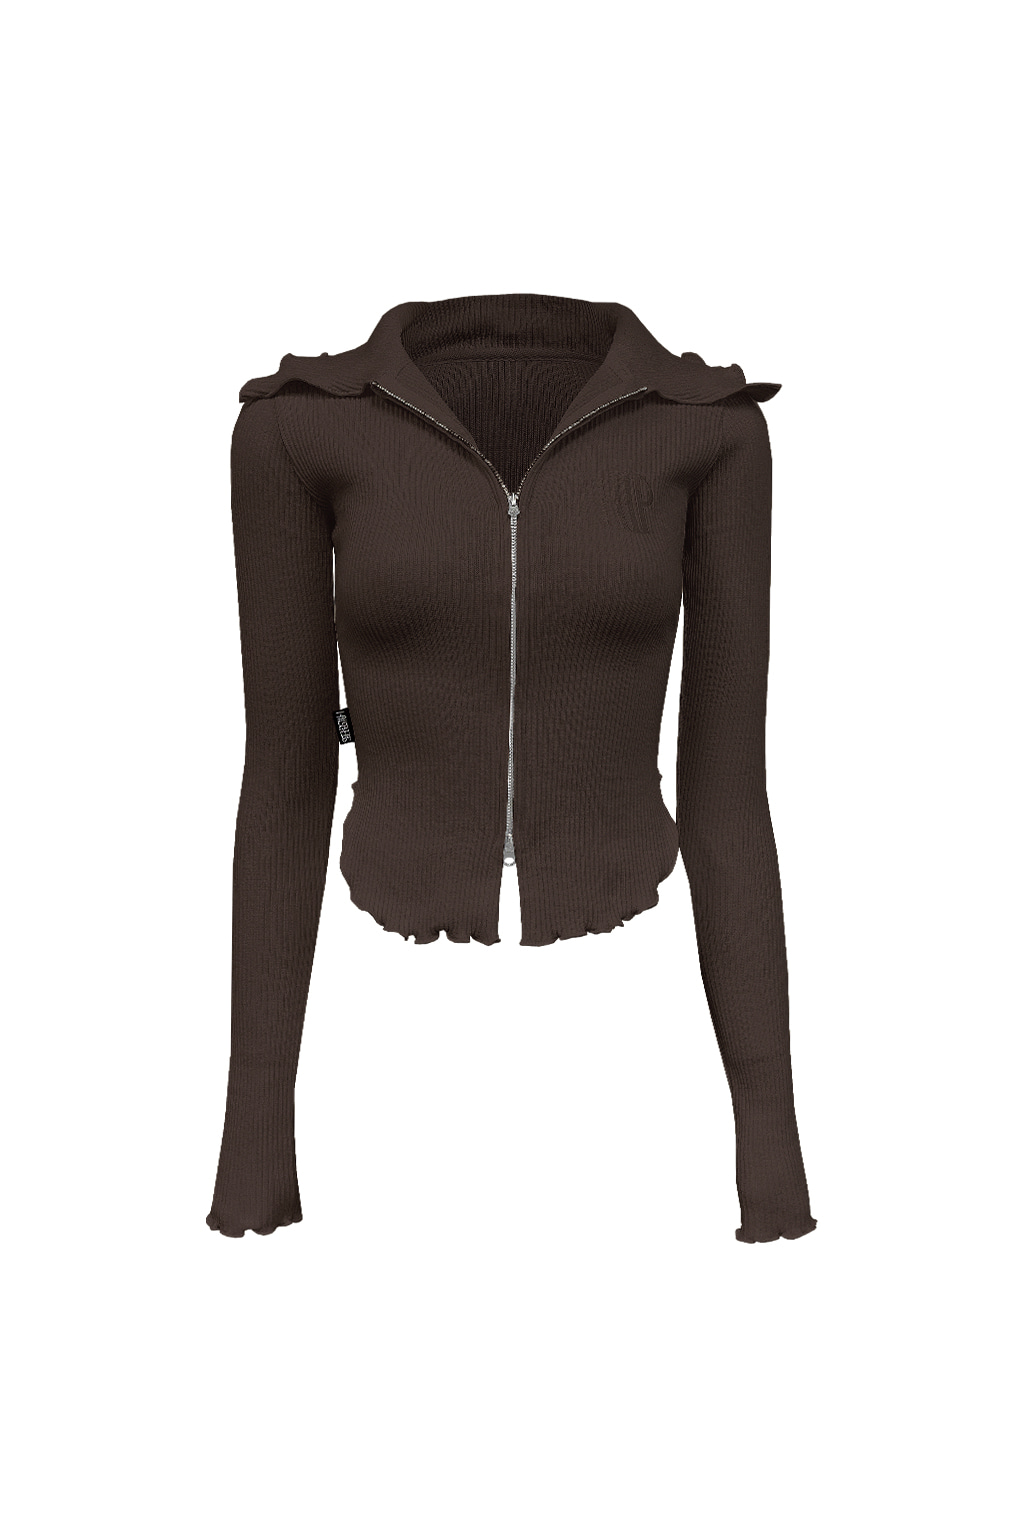 Ribbed Tension Two Way Glamour Zip Up Dark Chocolate.